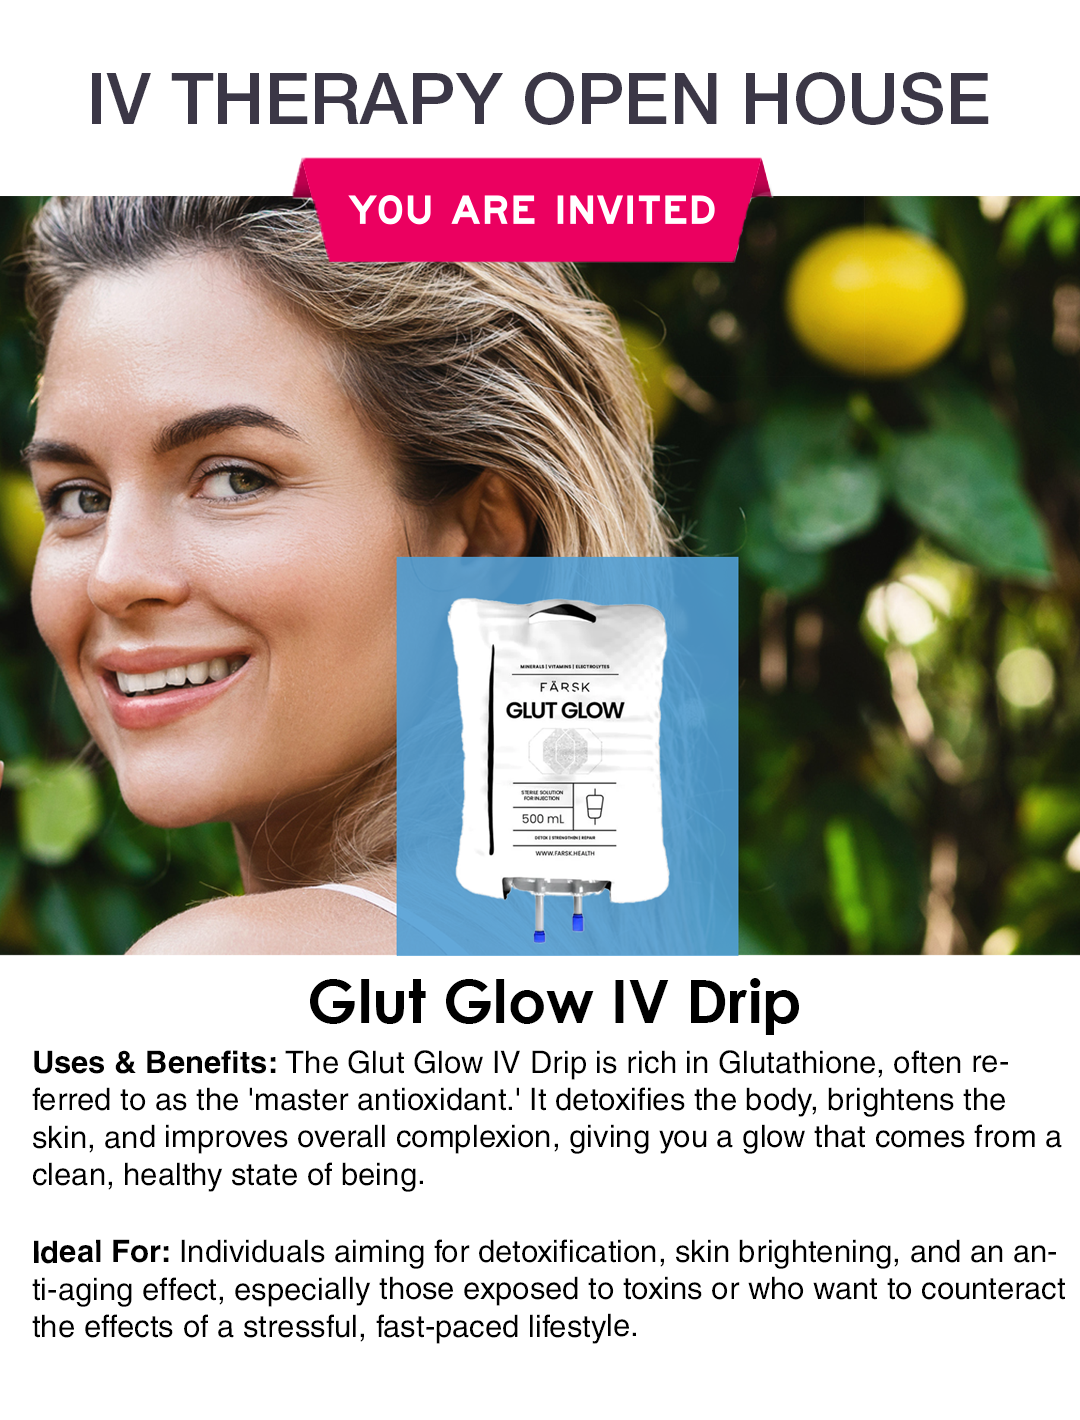 Glut Glow IV Drip at The Lip Doctor to detoxify and brighten skin